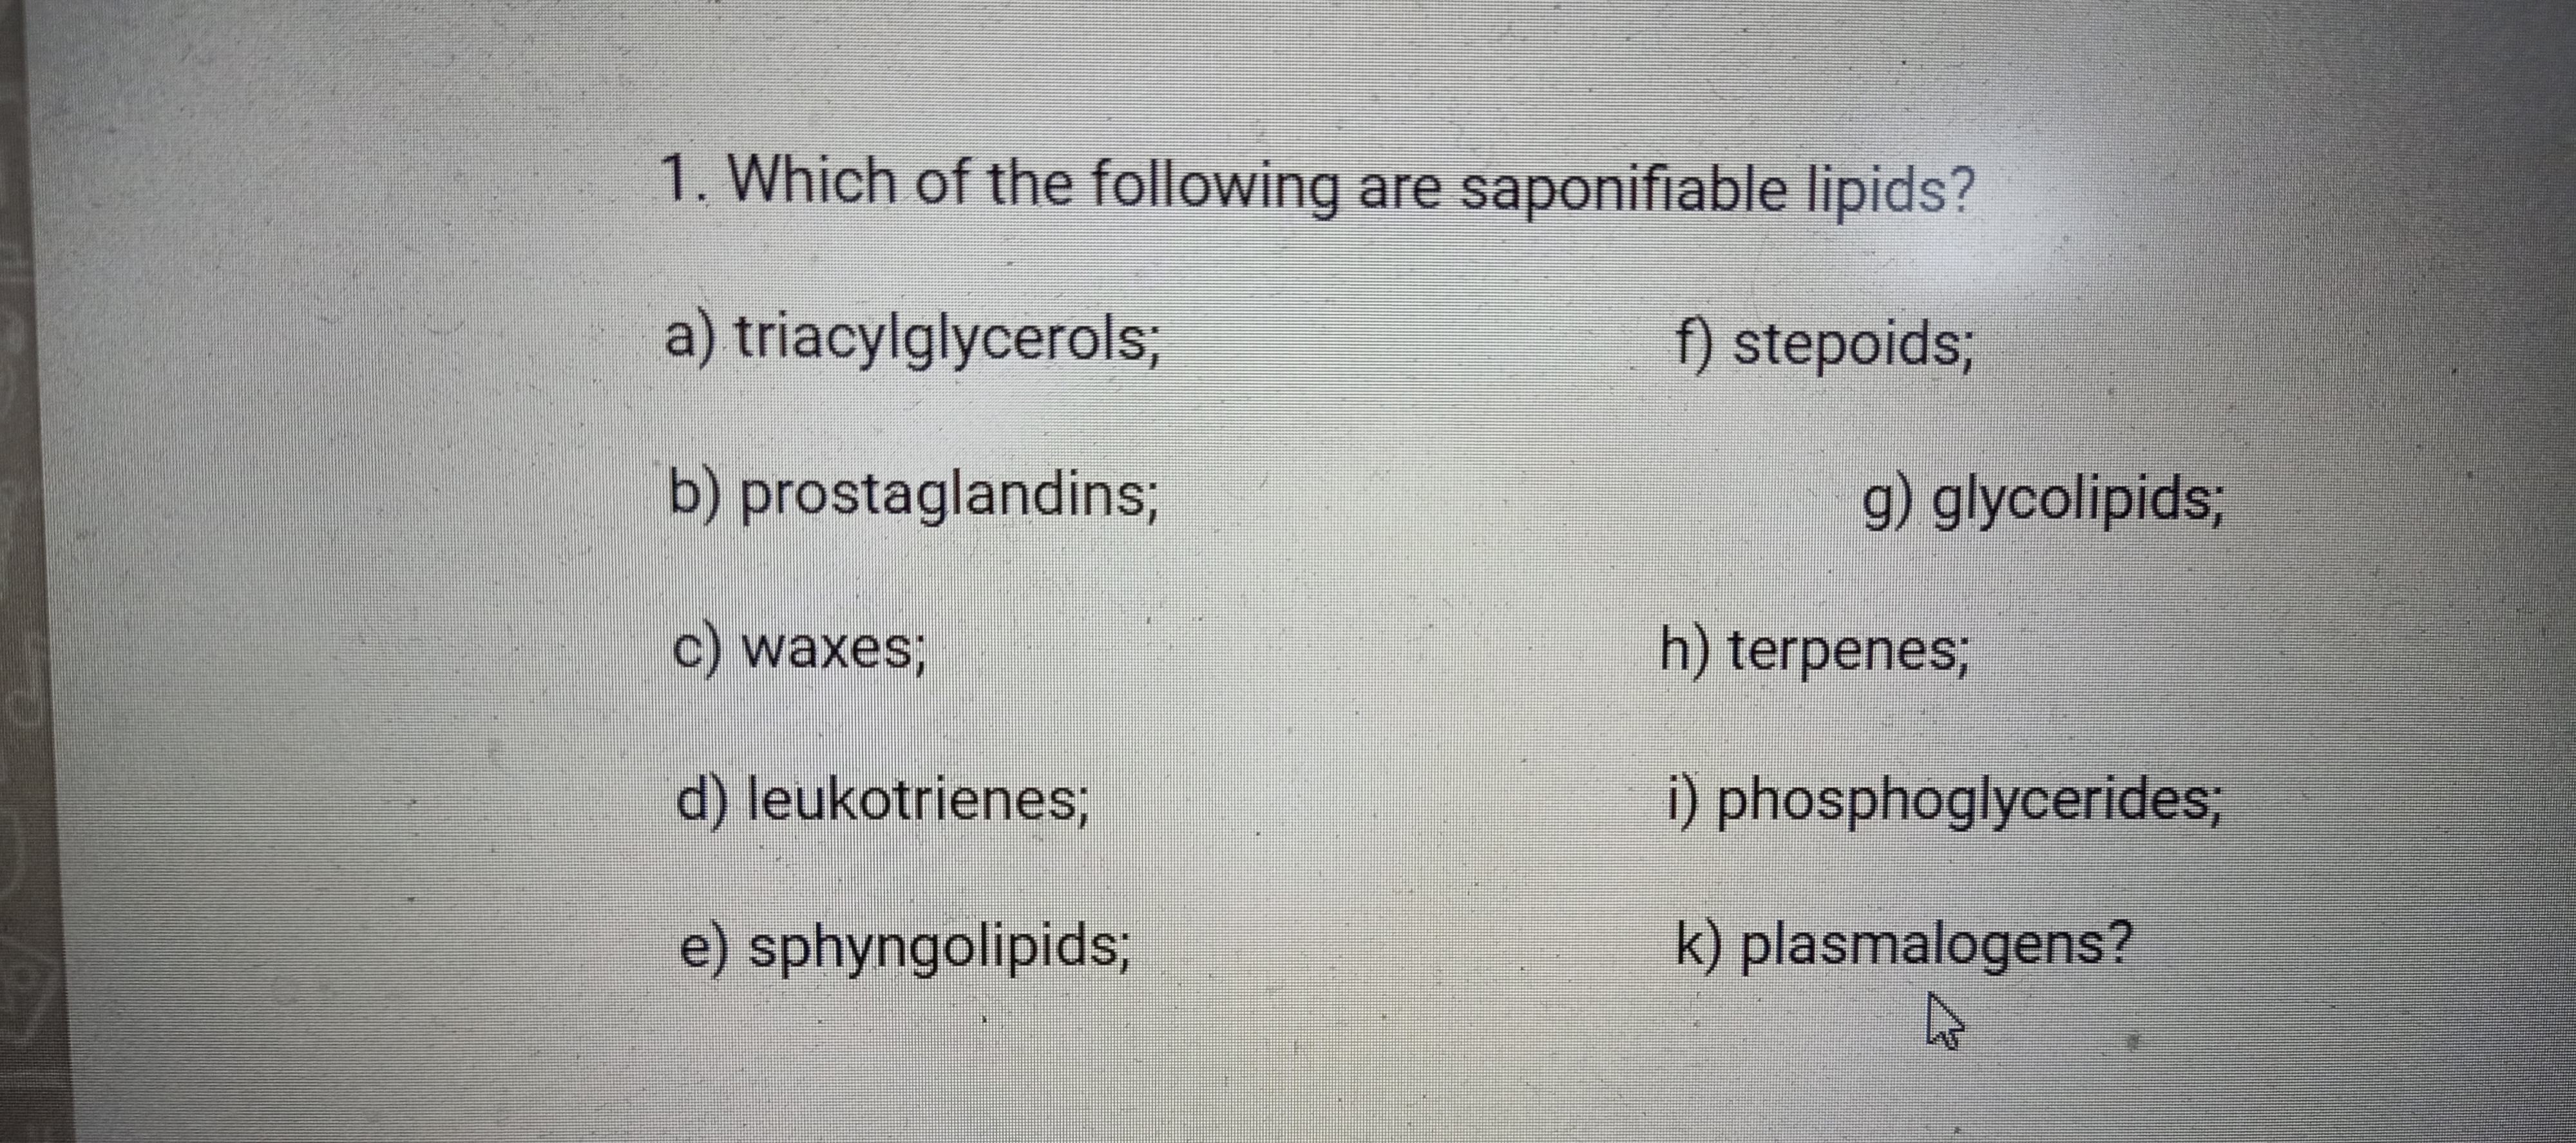 1. Which of the following are saponifiable lipids?
a) triacylglycerols;
f) stepoids3;
b) prostaglandins3B
g) glycolipids;
c) waxes;B
h) terpenes;
d) leukotrienes;
i) phosphoglycerides;
e) sphyngolipids;
k) plasmalogens?
